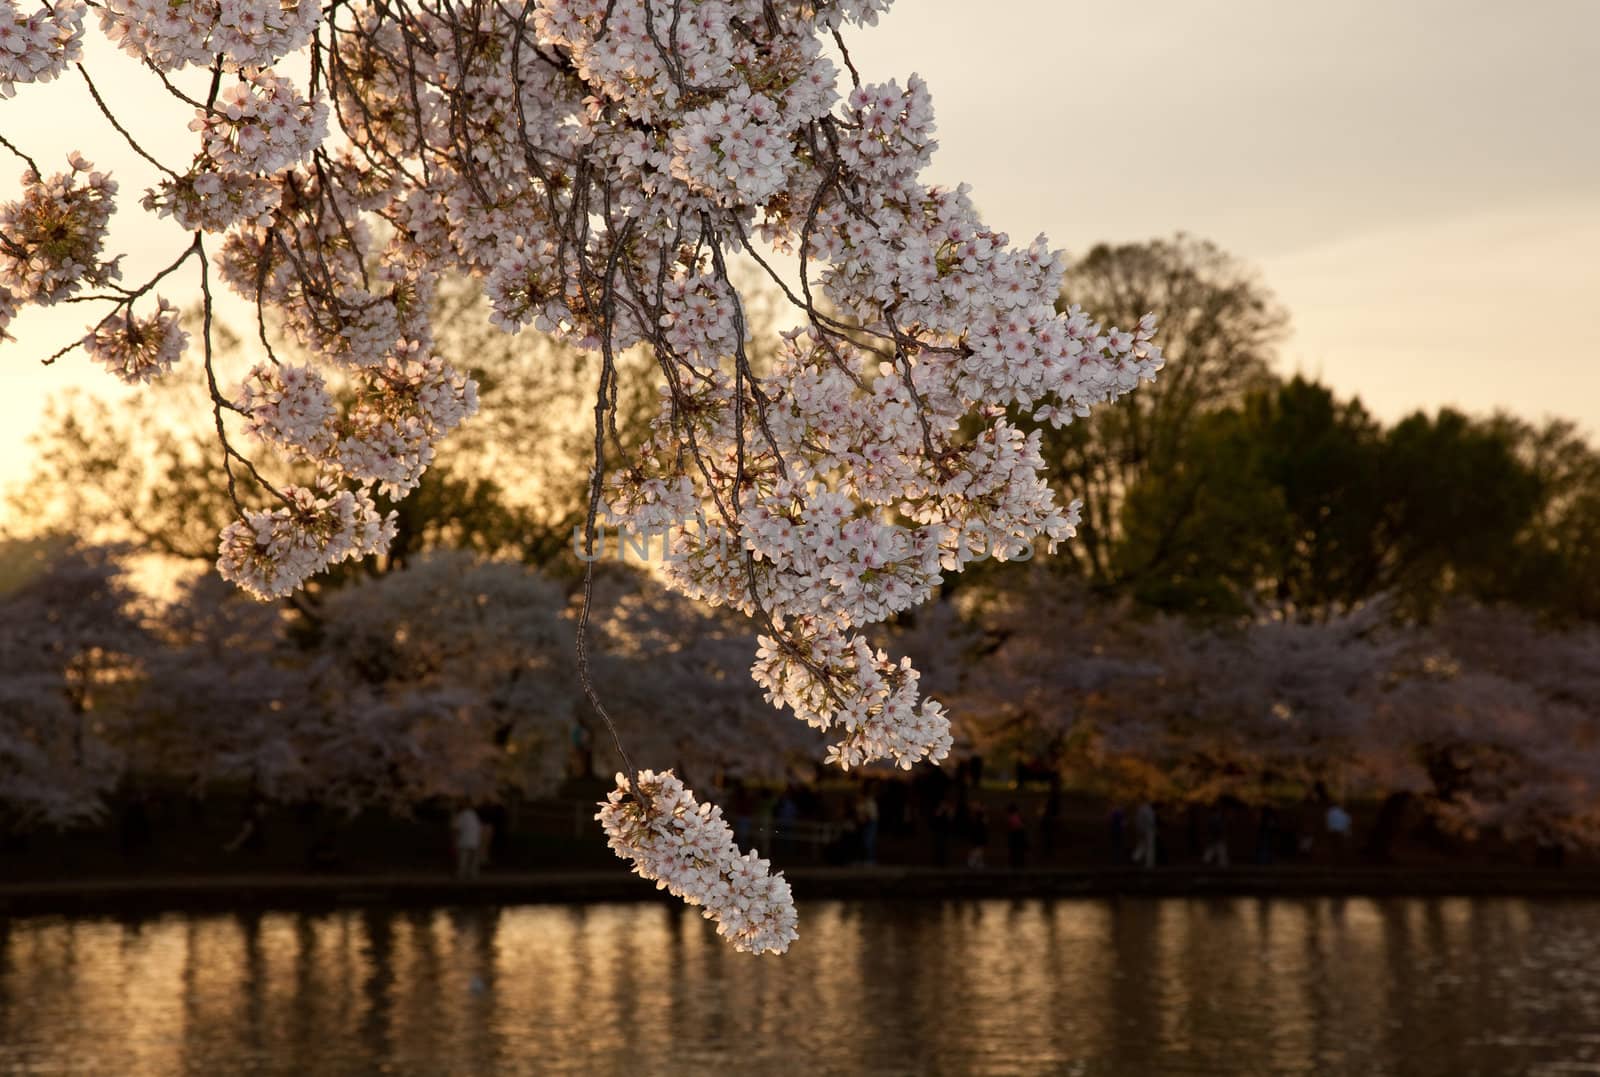 Cherry blossoms against sunset by steheap